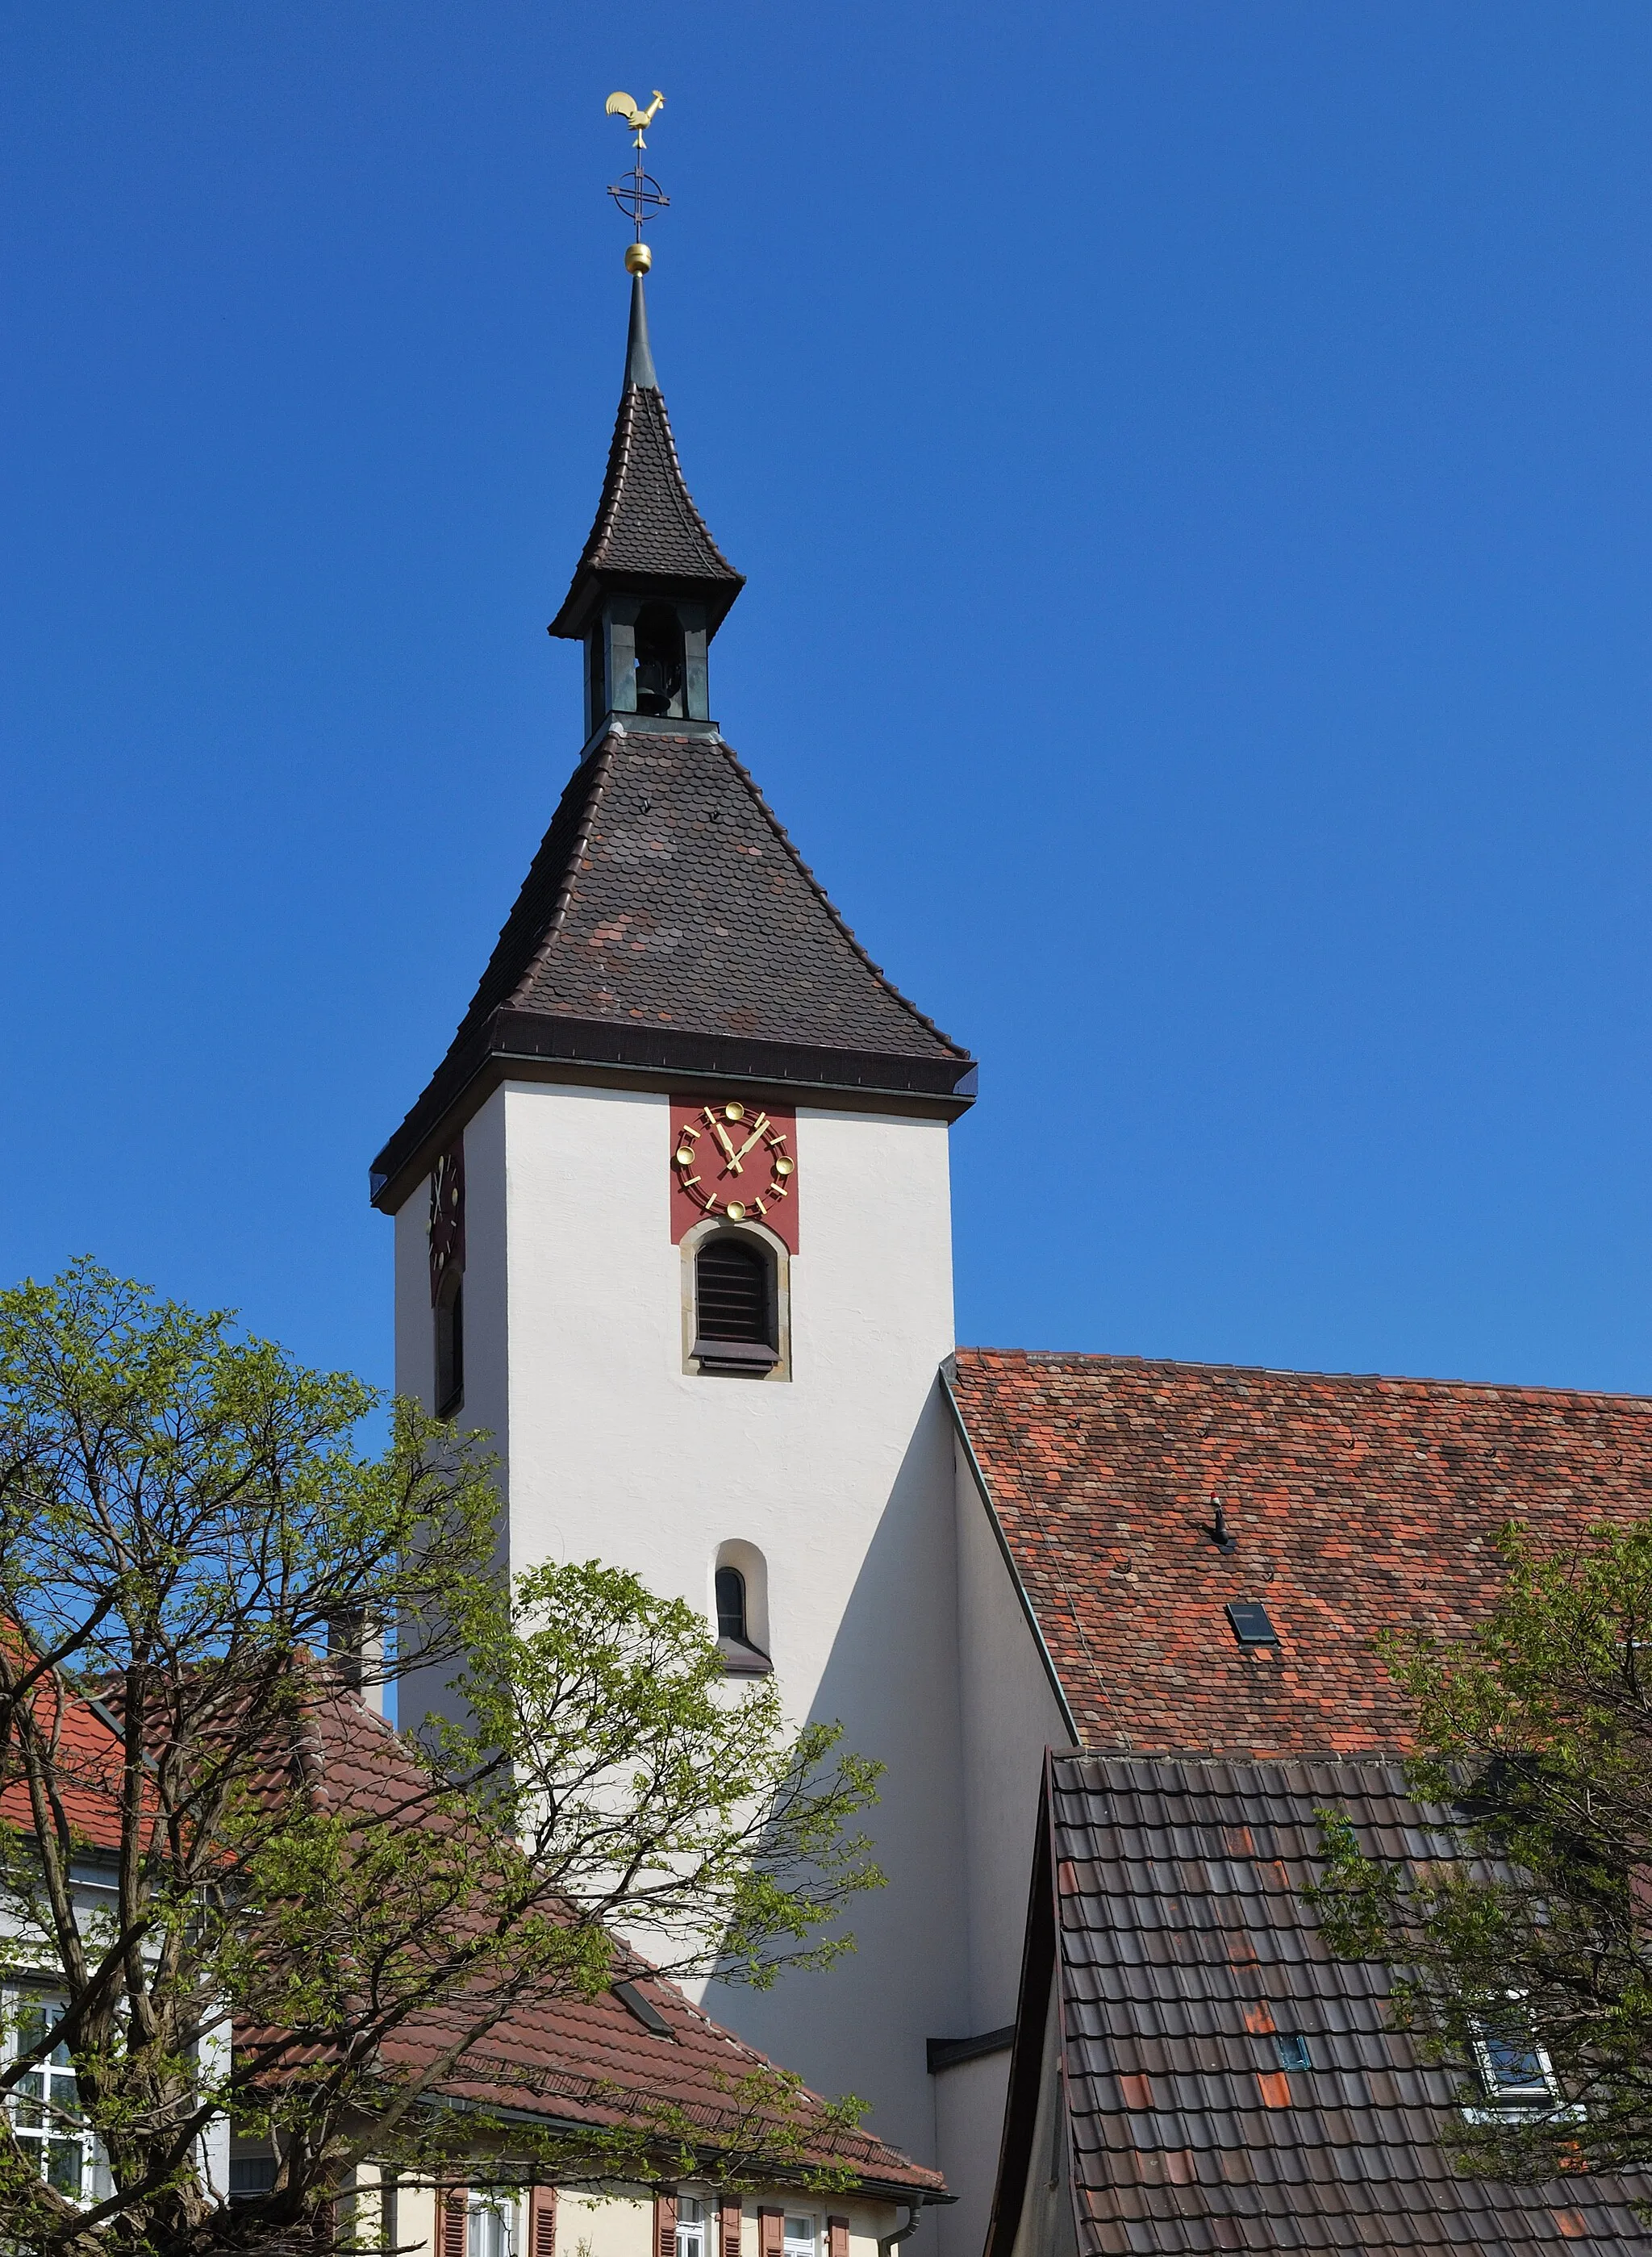 Photo showing: Tower of the Johanneskirche in Münchingen in Southern Germany.